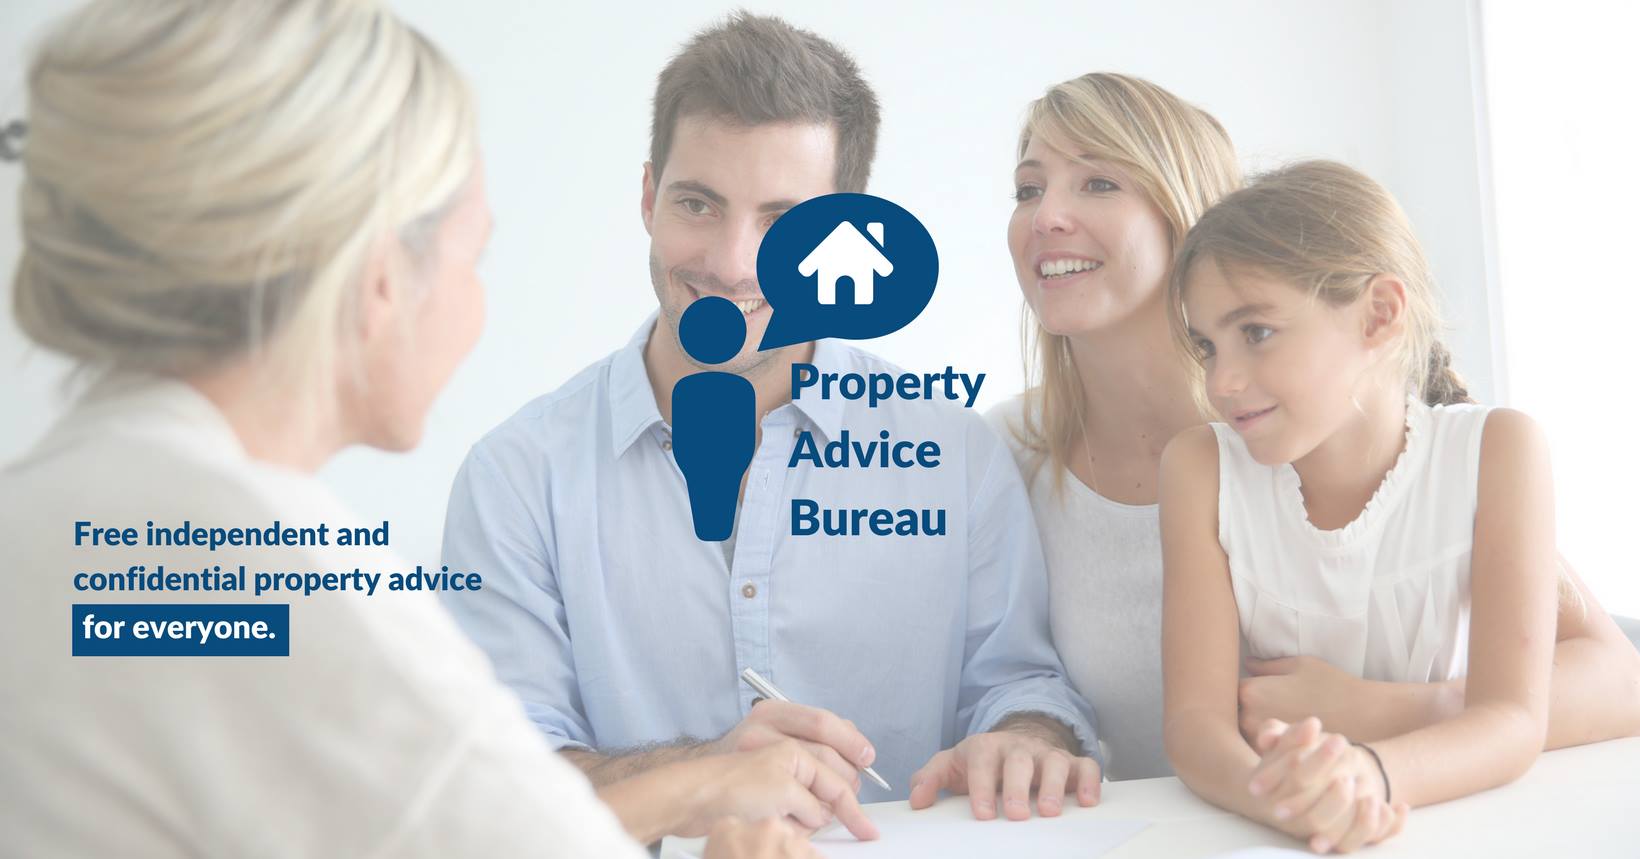 Campbells Launch ‘Property Advice Bureau’ to Help The Public With Property Related Problems